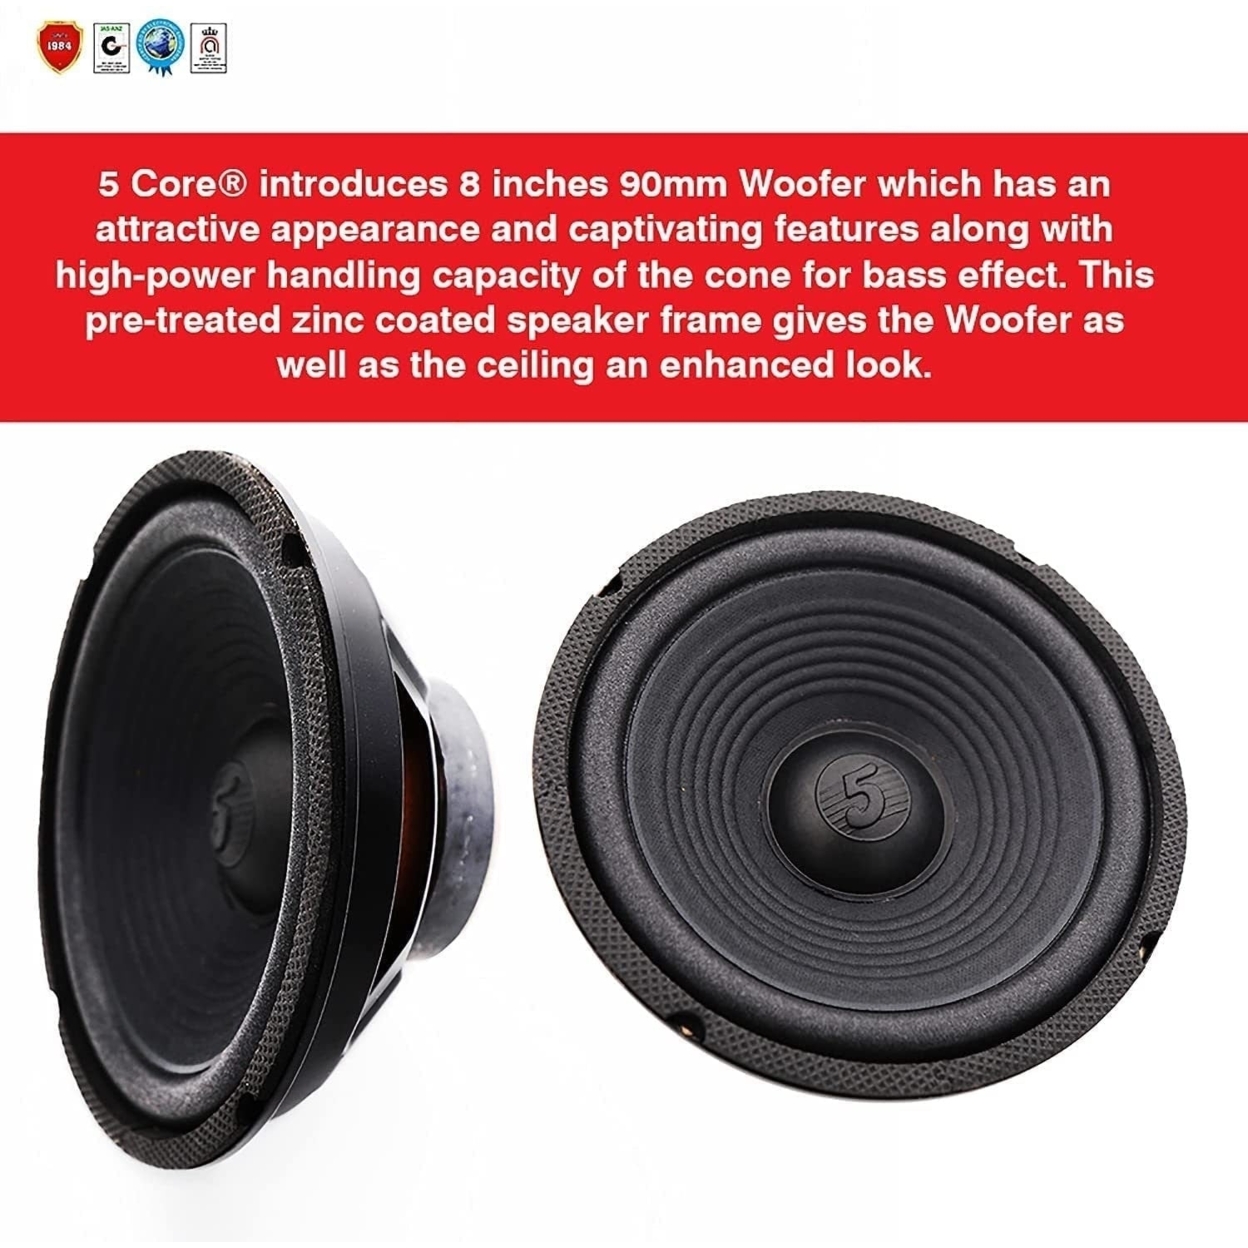 Replacement 8" Woofer Speaker 13 Oz Magnet 500W PMPO Car Home Audio STEREO 4 Ohm - image 5 of 7